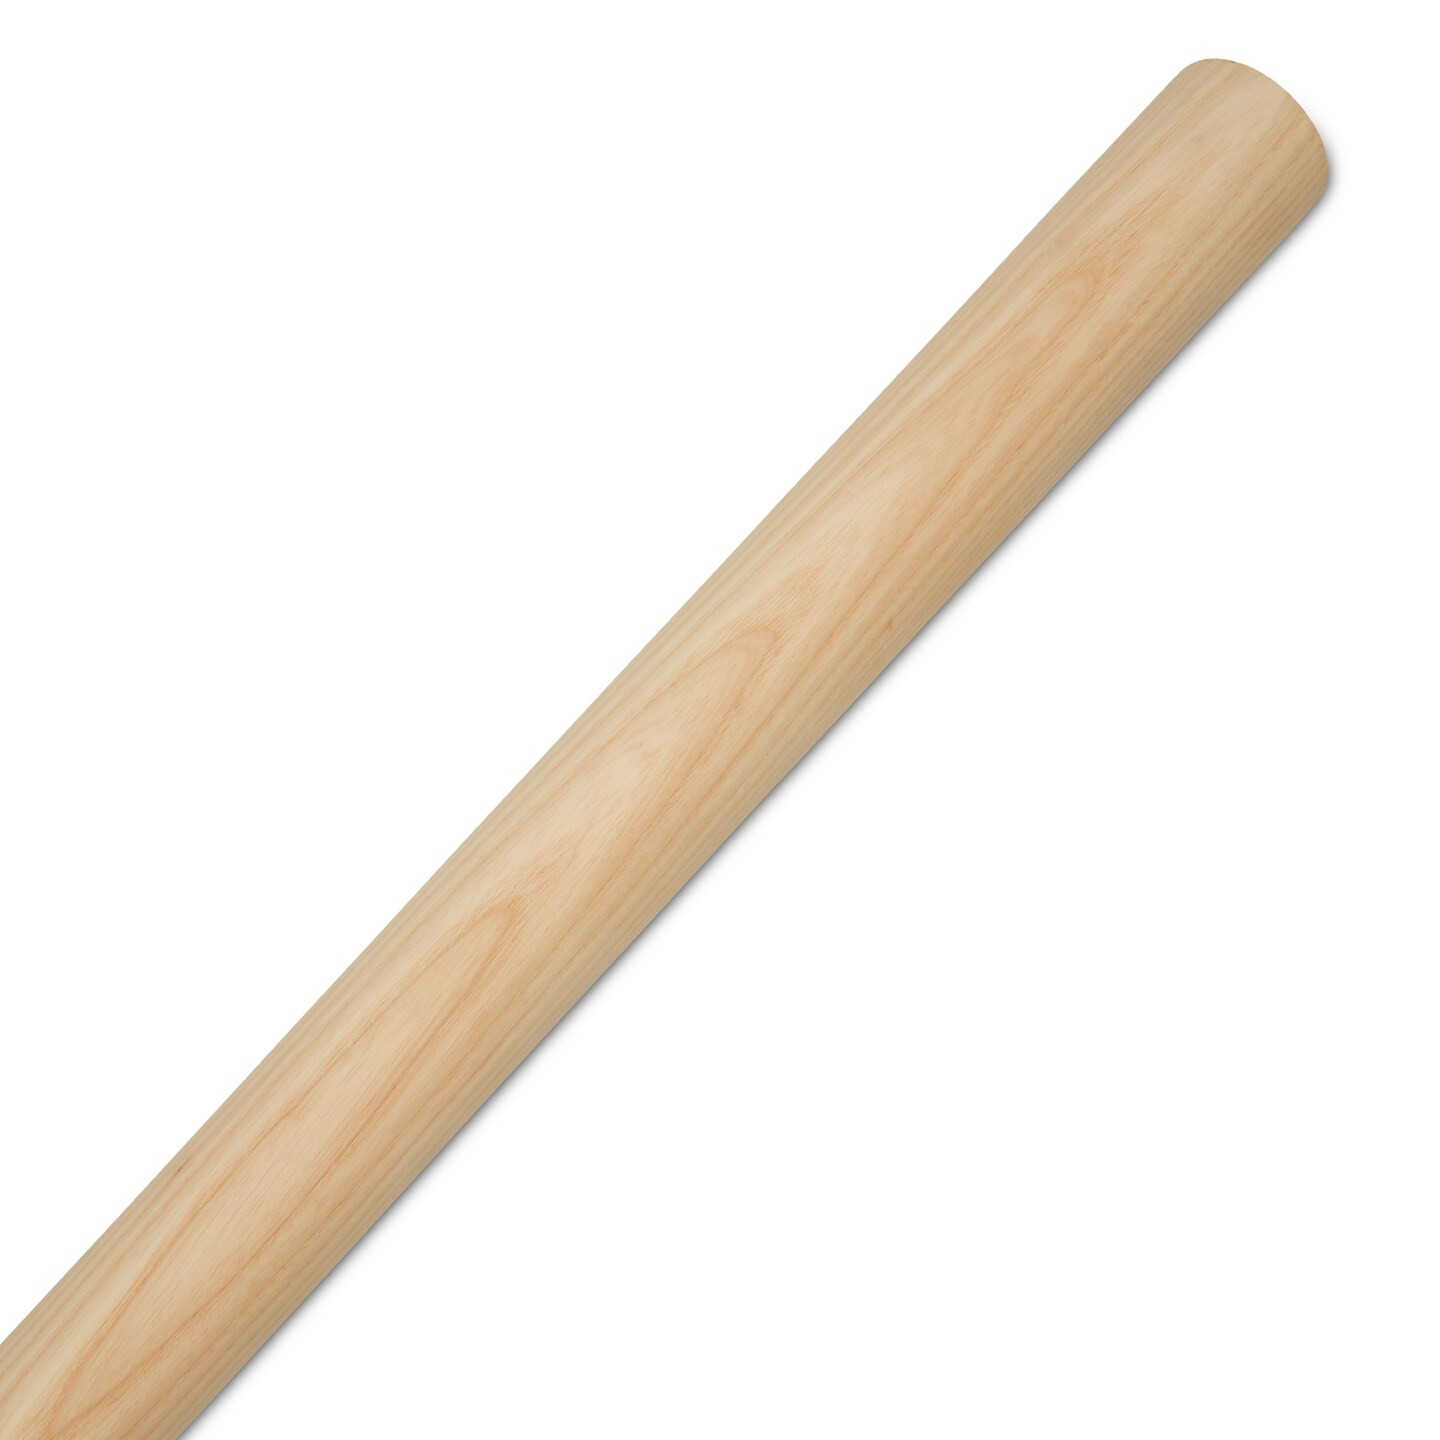 Wooden Dowel Rods 3/8 inch Thick, Multiple Lengths Available, Unfinished Sticks  Crafts & DIY, Woodpeckers